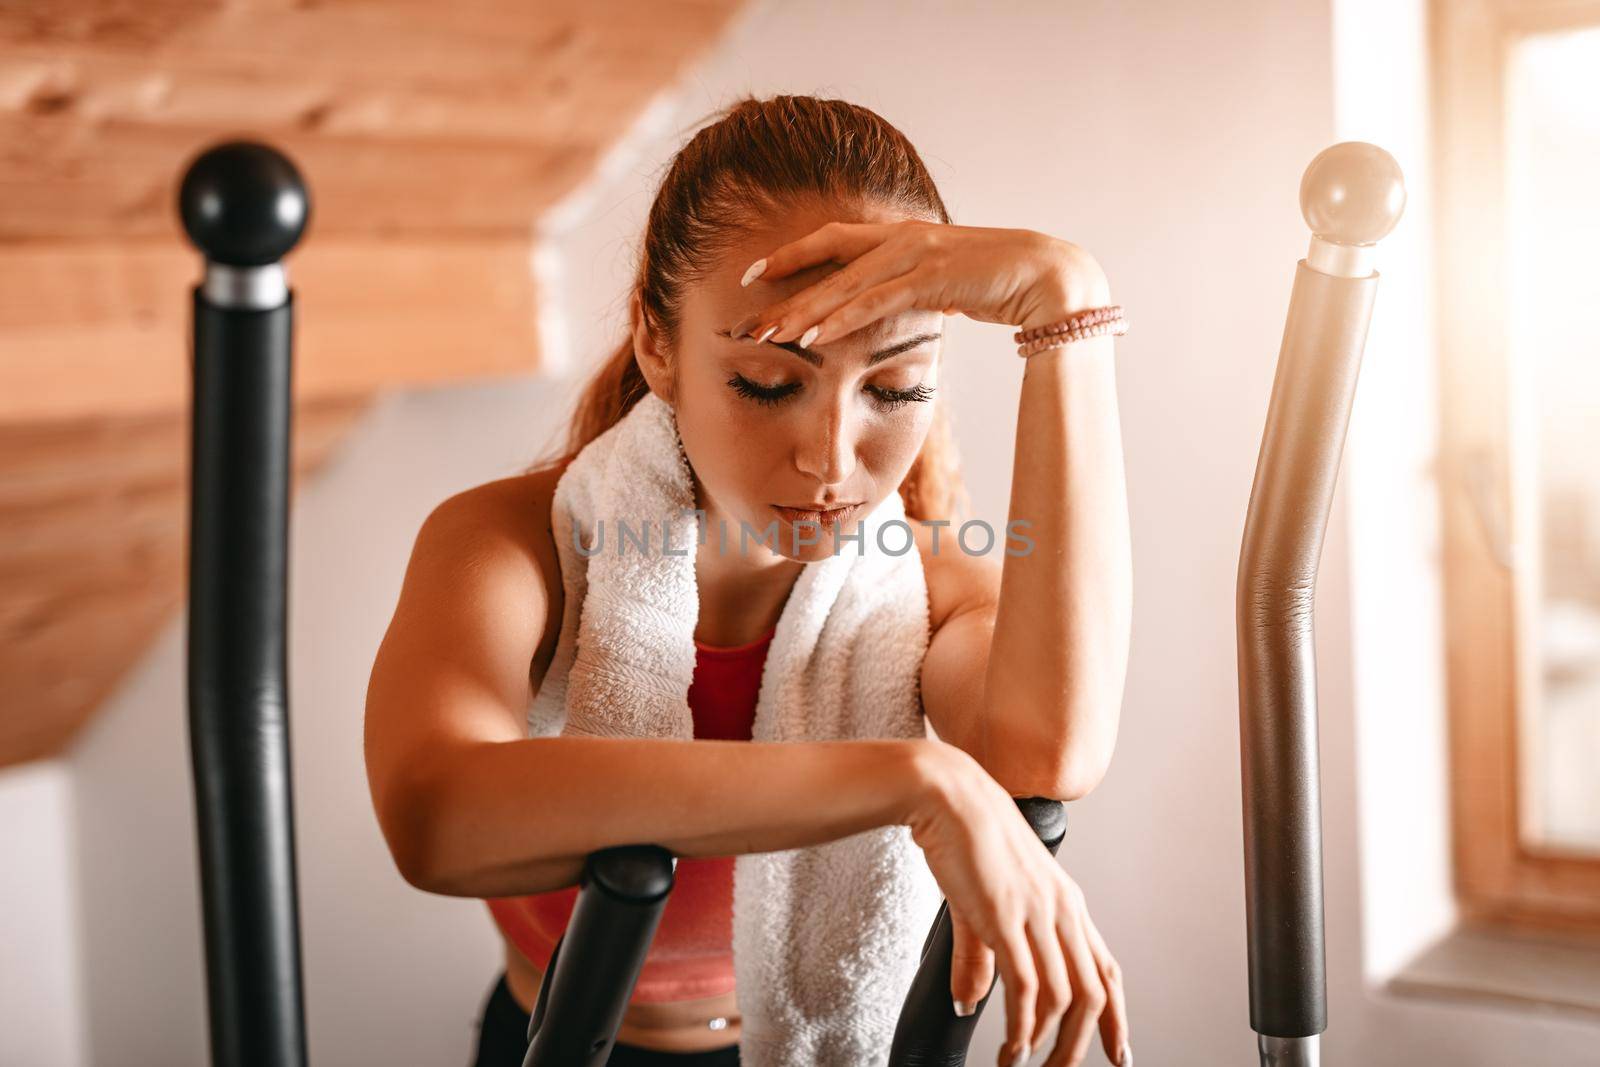 Attractive woman is exhausted and taking a break from hard exercising in living room at home.